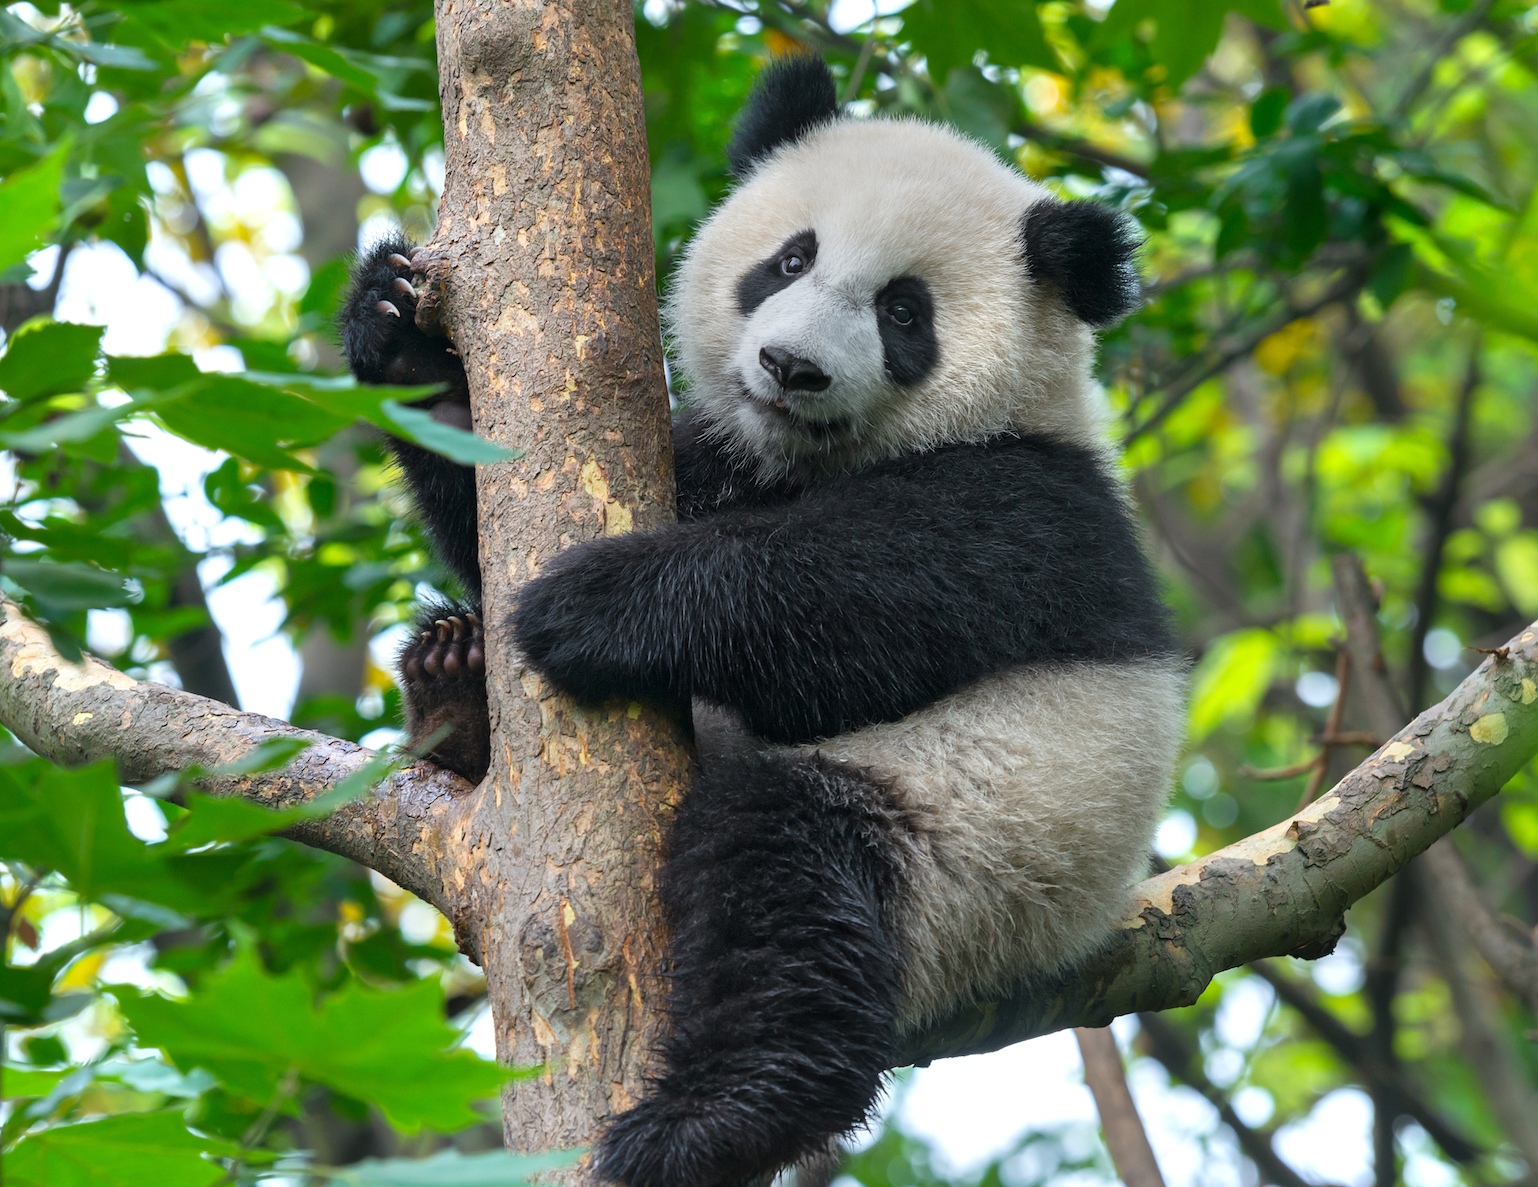 giant pandas move quietly through bambooo forests